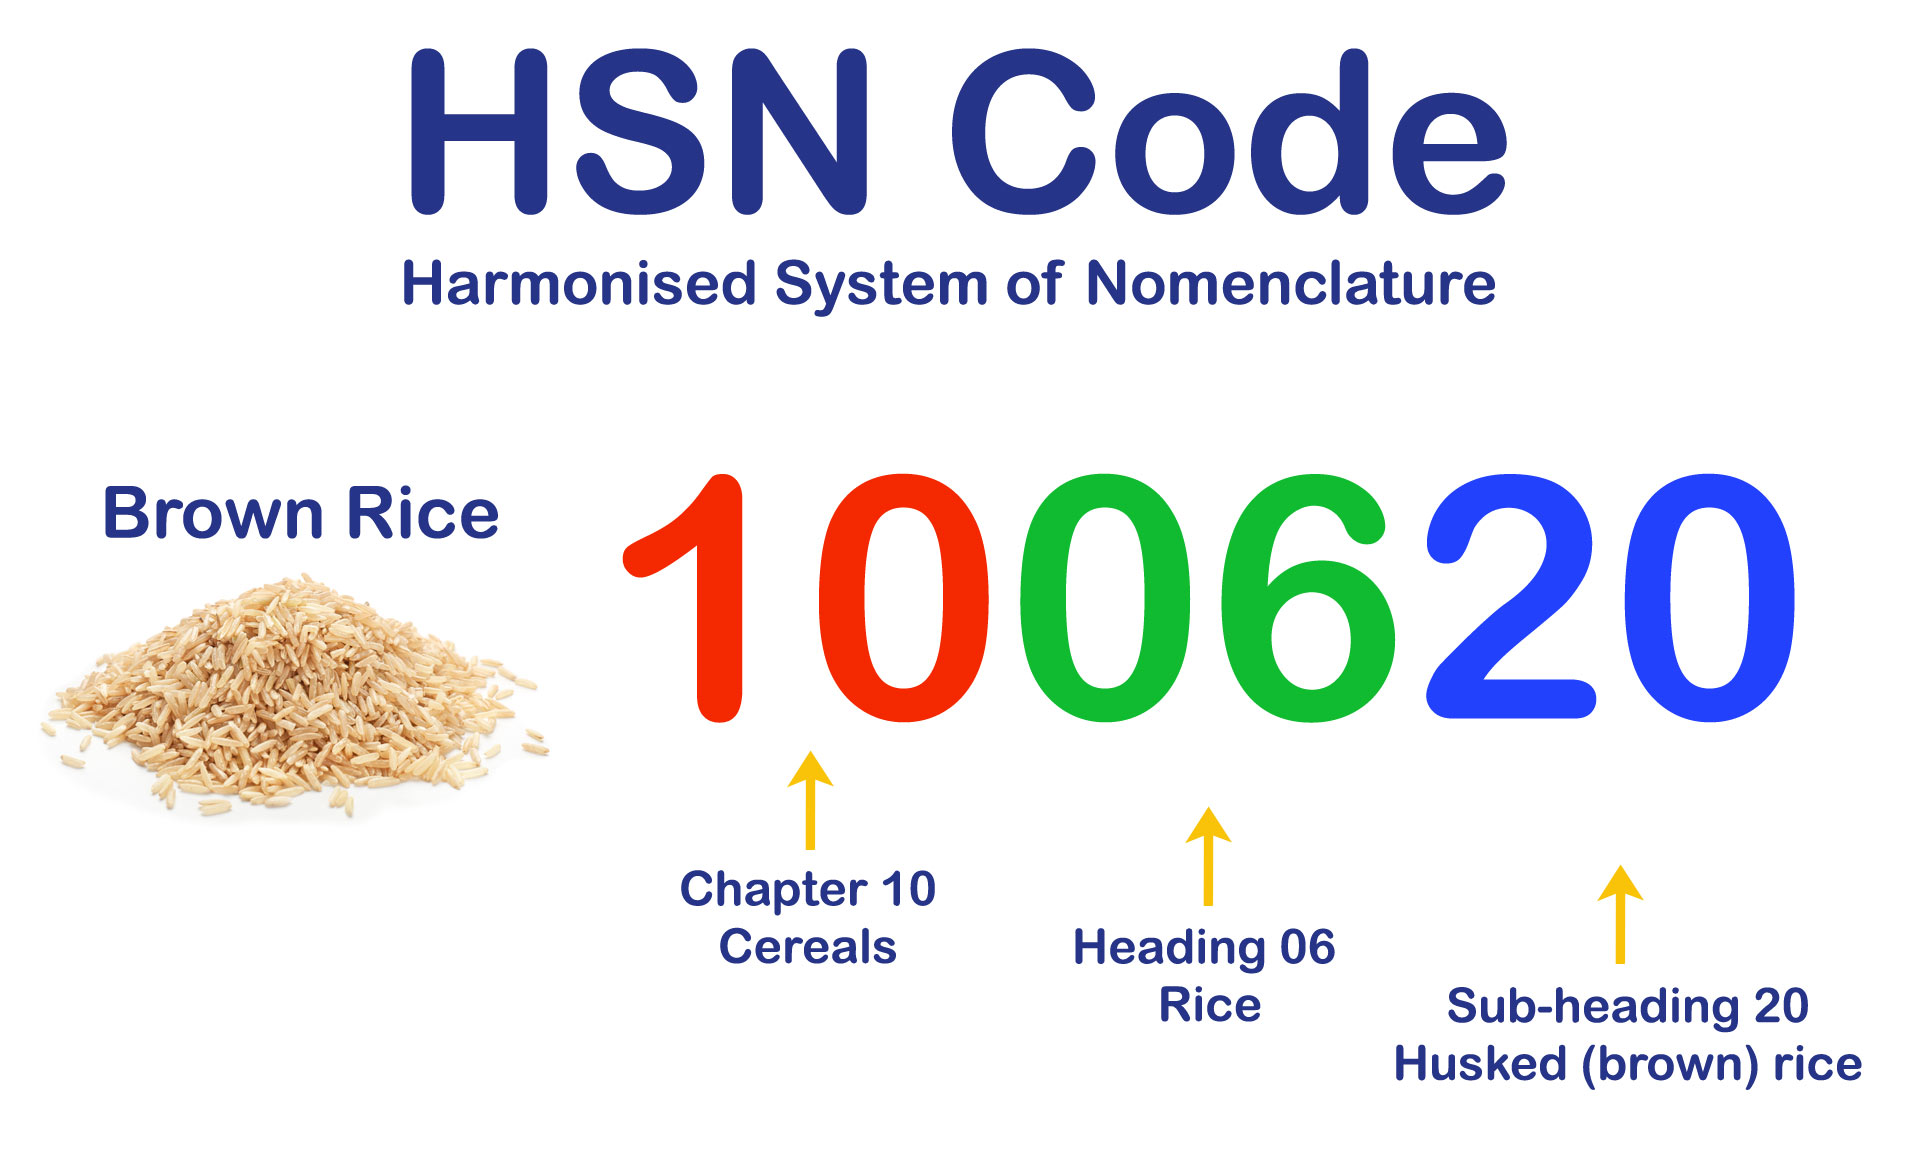 Definition and Uses of HSN Codes